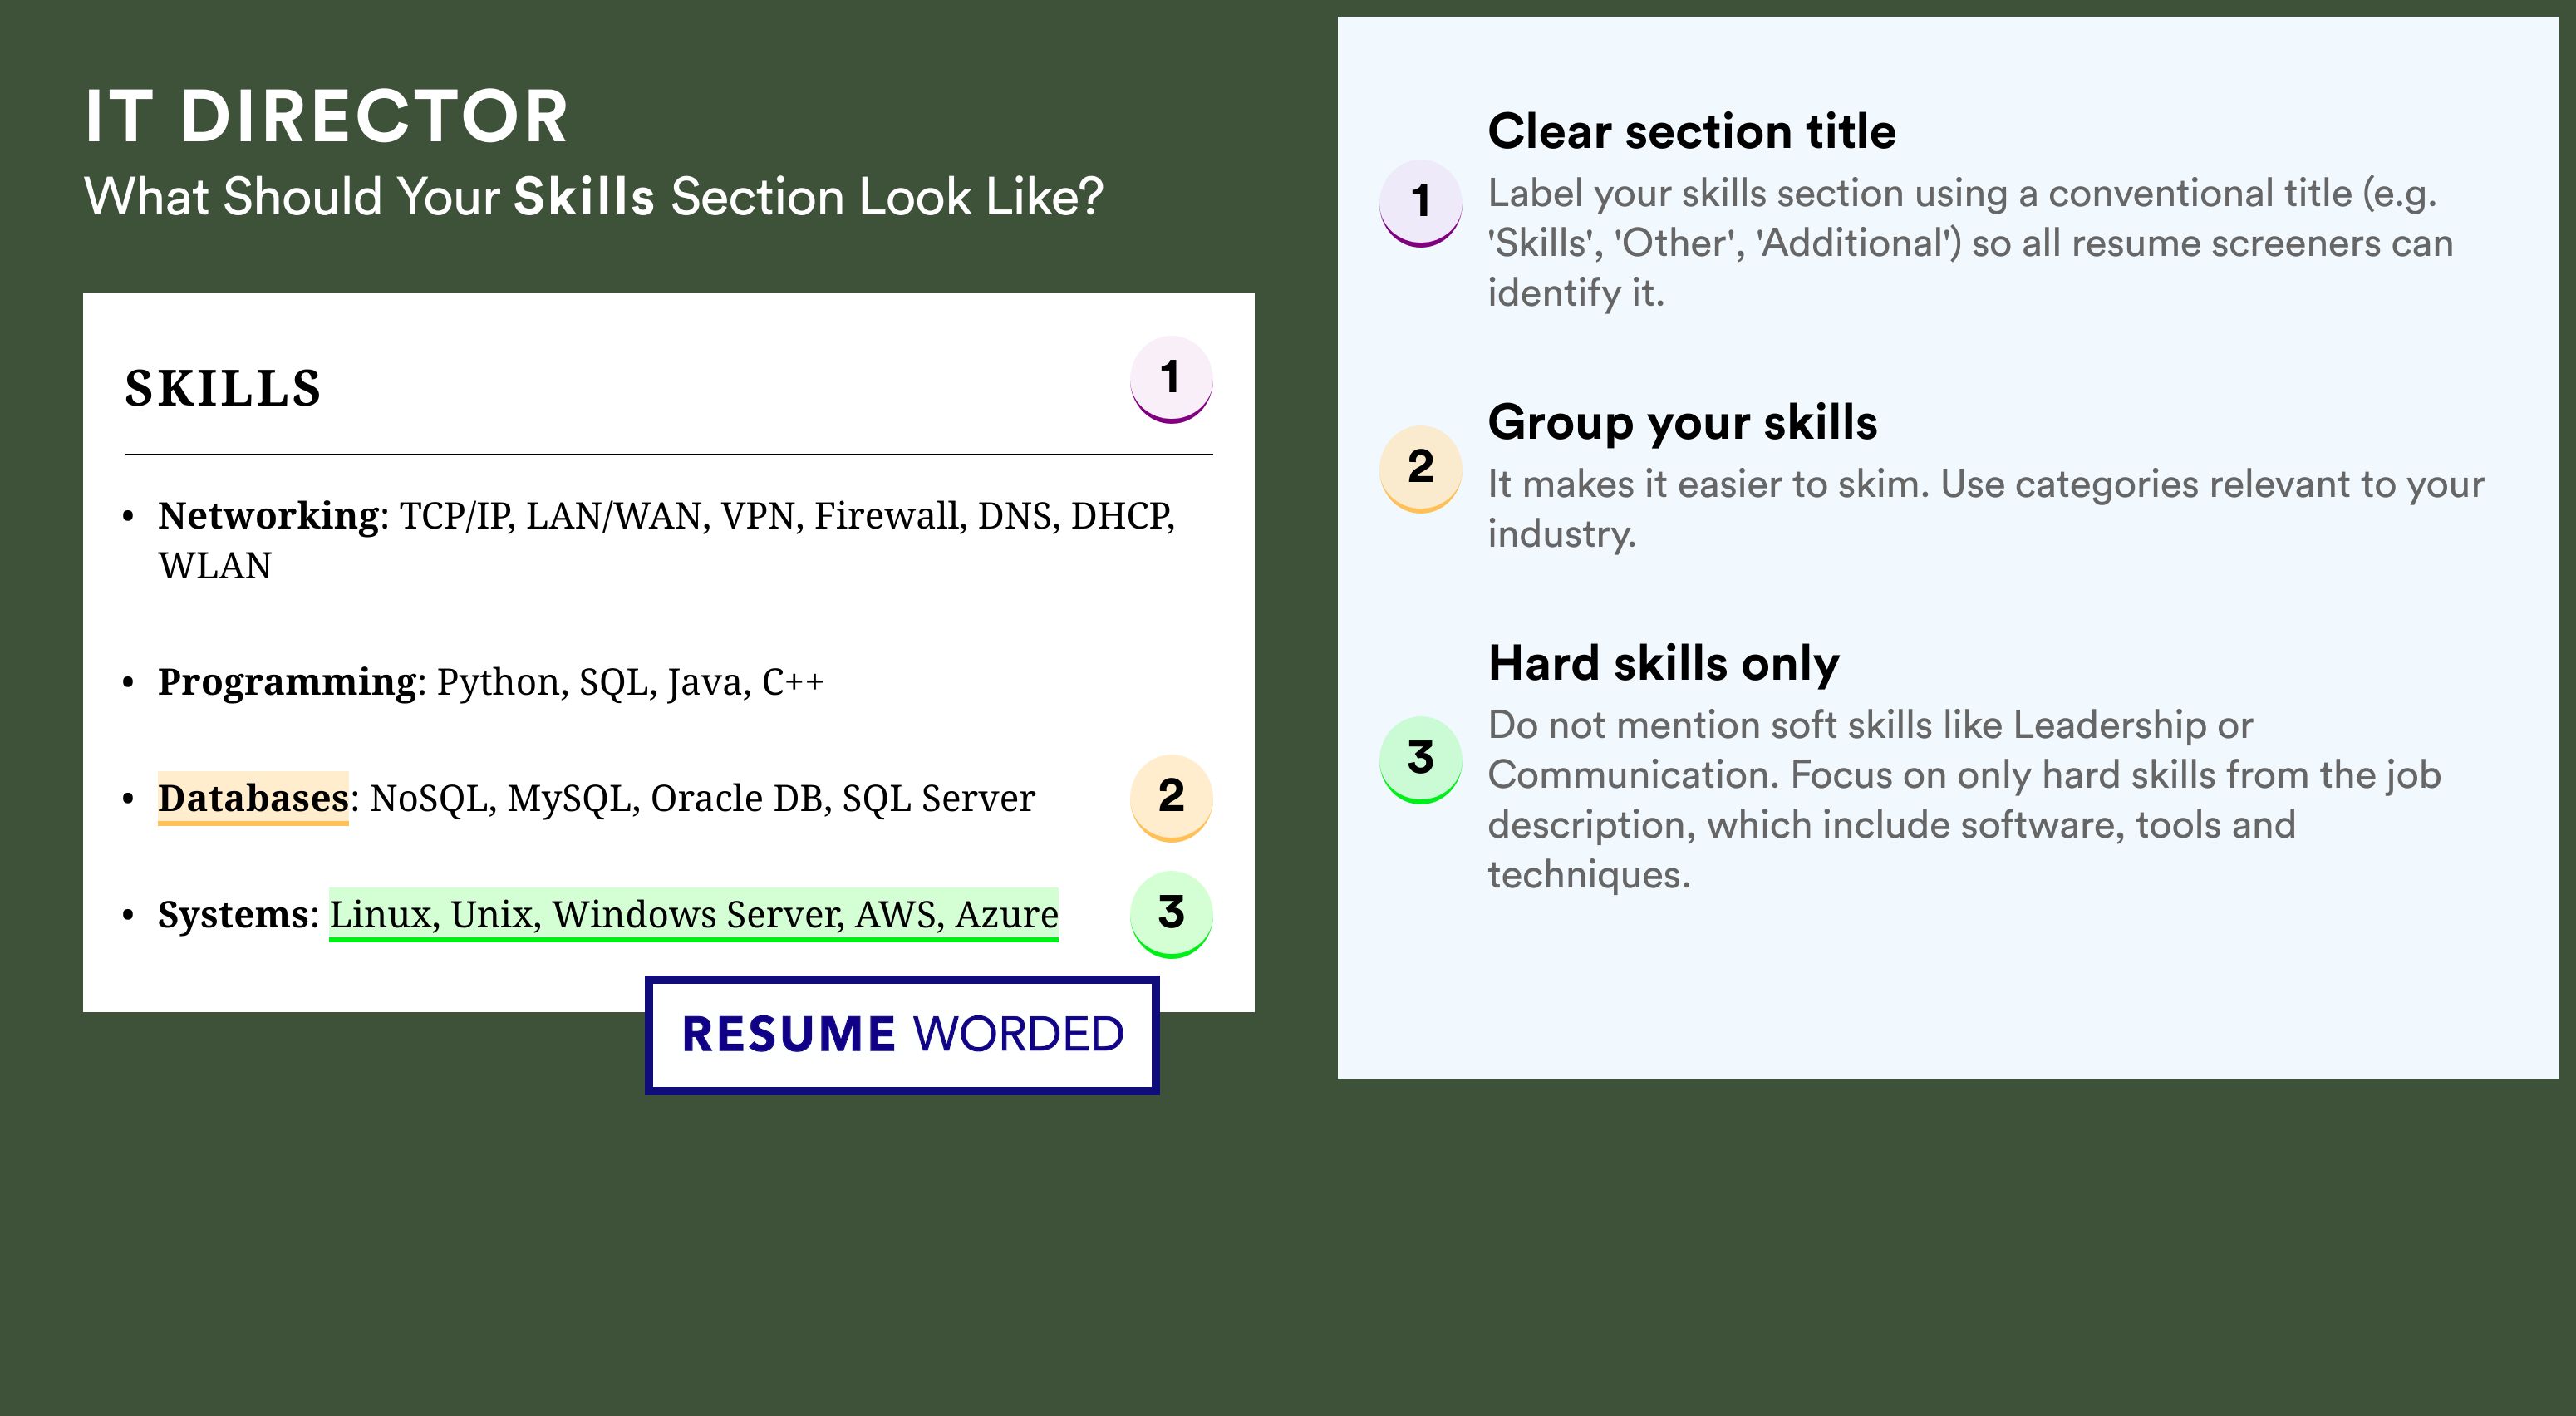 How To Write Your Skills Section - IT Director Roles